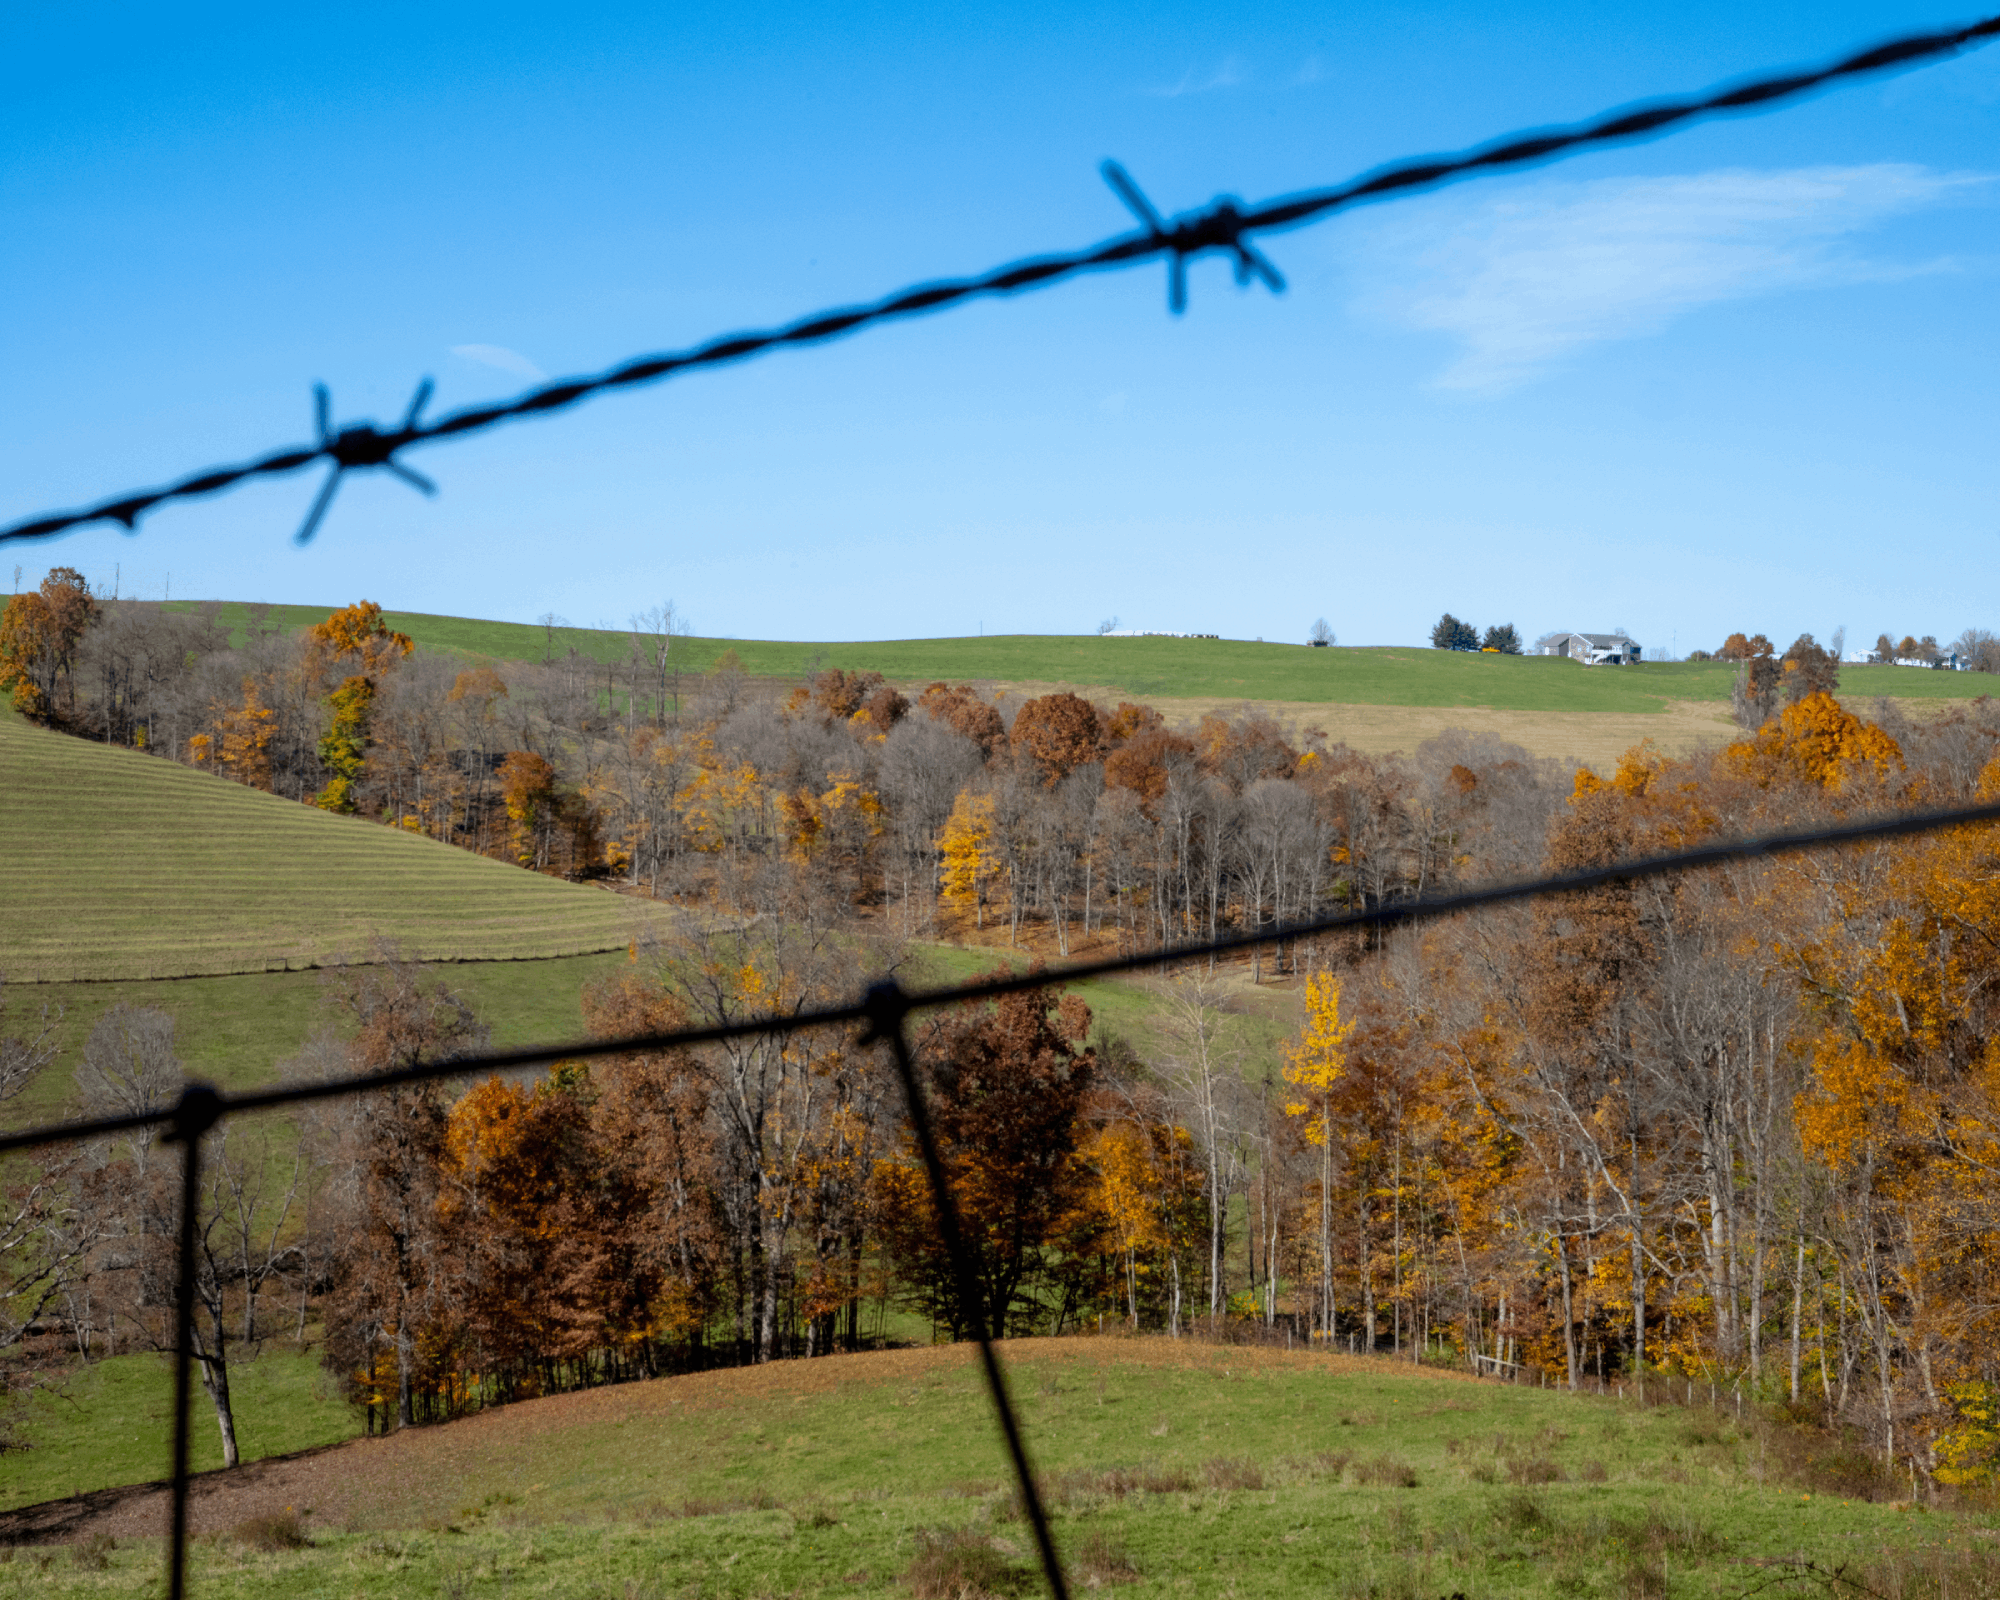 Fall colors viewed through a fence at Dysart Woods in Belmont County, near Ohio University’s Eastern Campus.